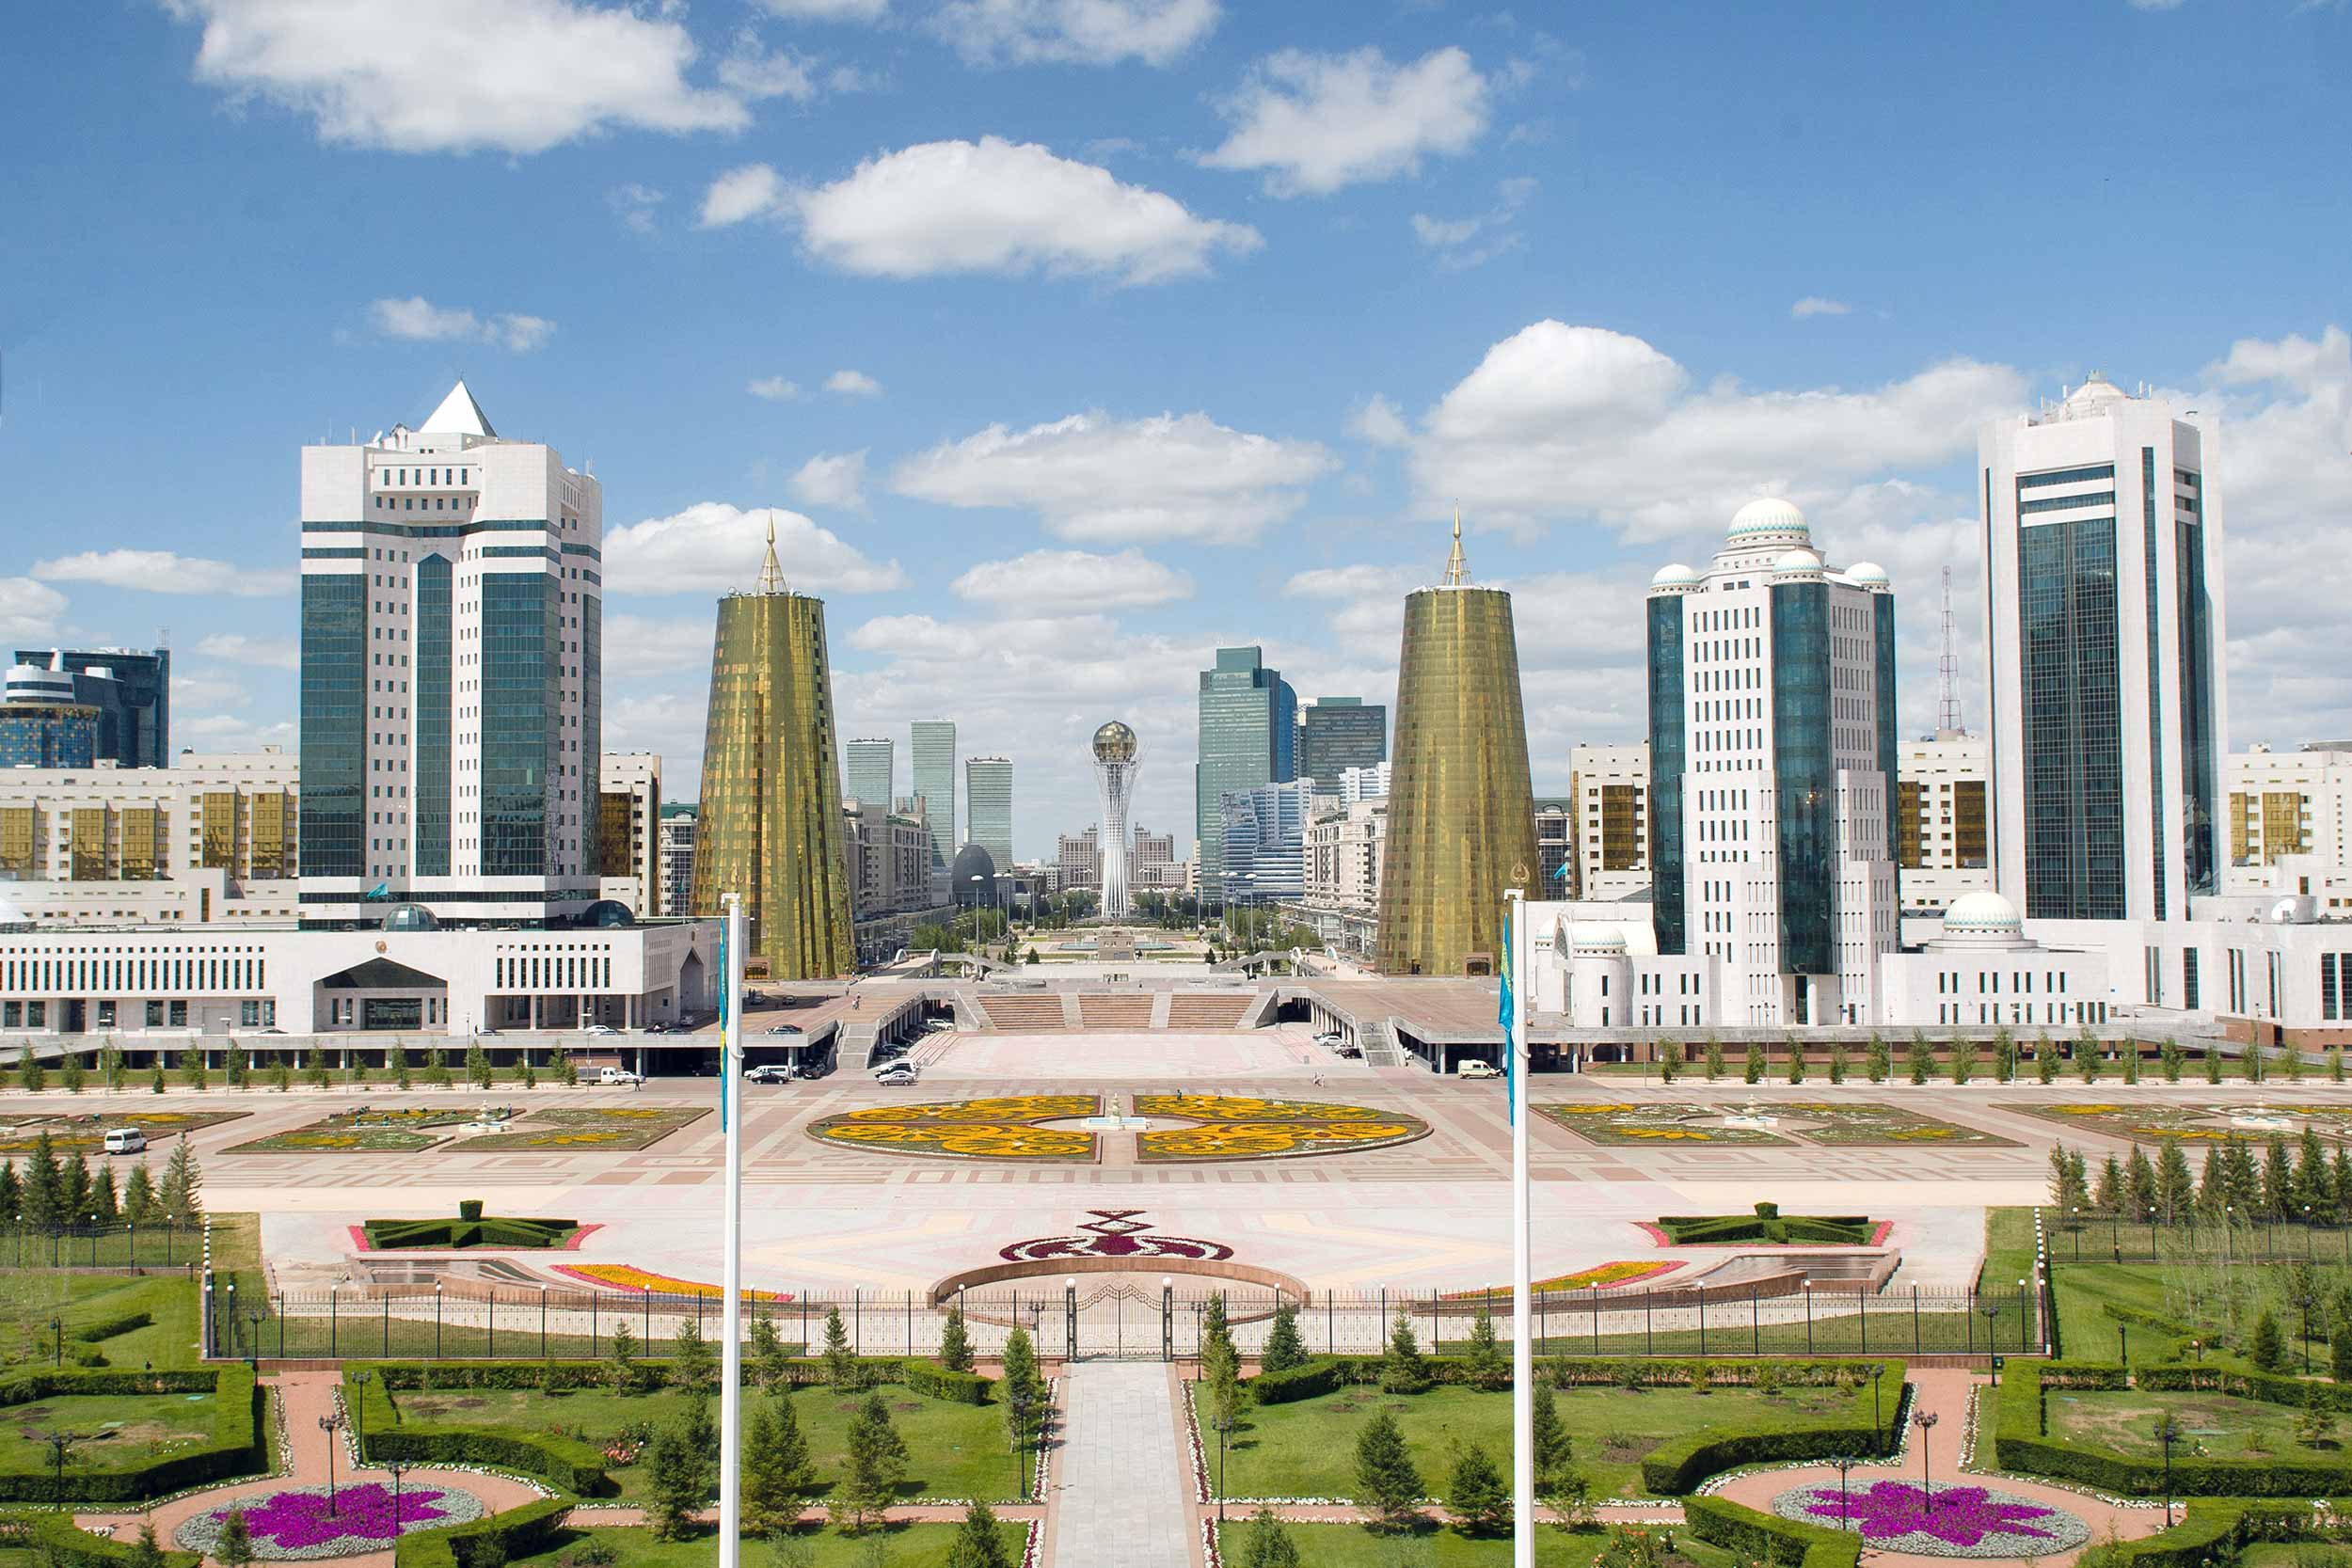 Kazakstan's capital Nur-Sultan, with flashy, glistening buildings provides a stark contrast to the villages with no running water and basic services just outside of the city. © Leon Neal - Pool/Getty Images